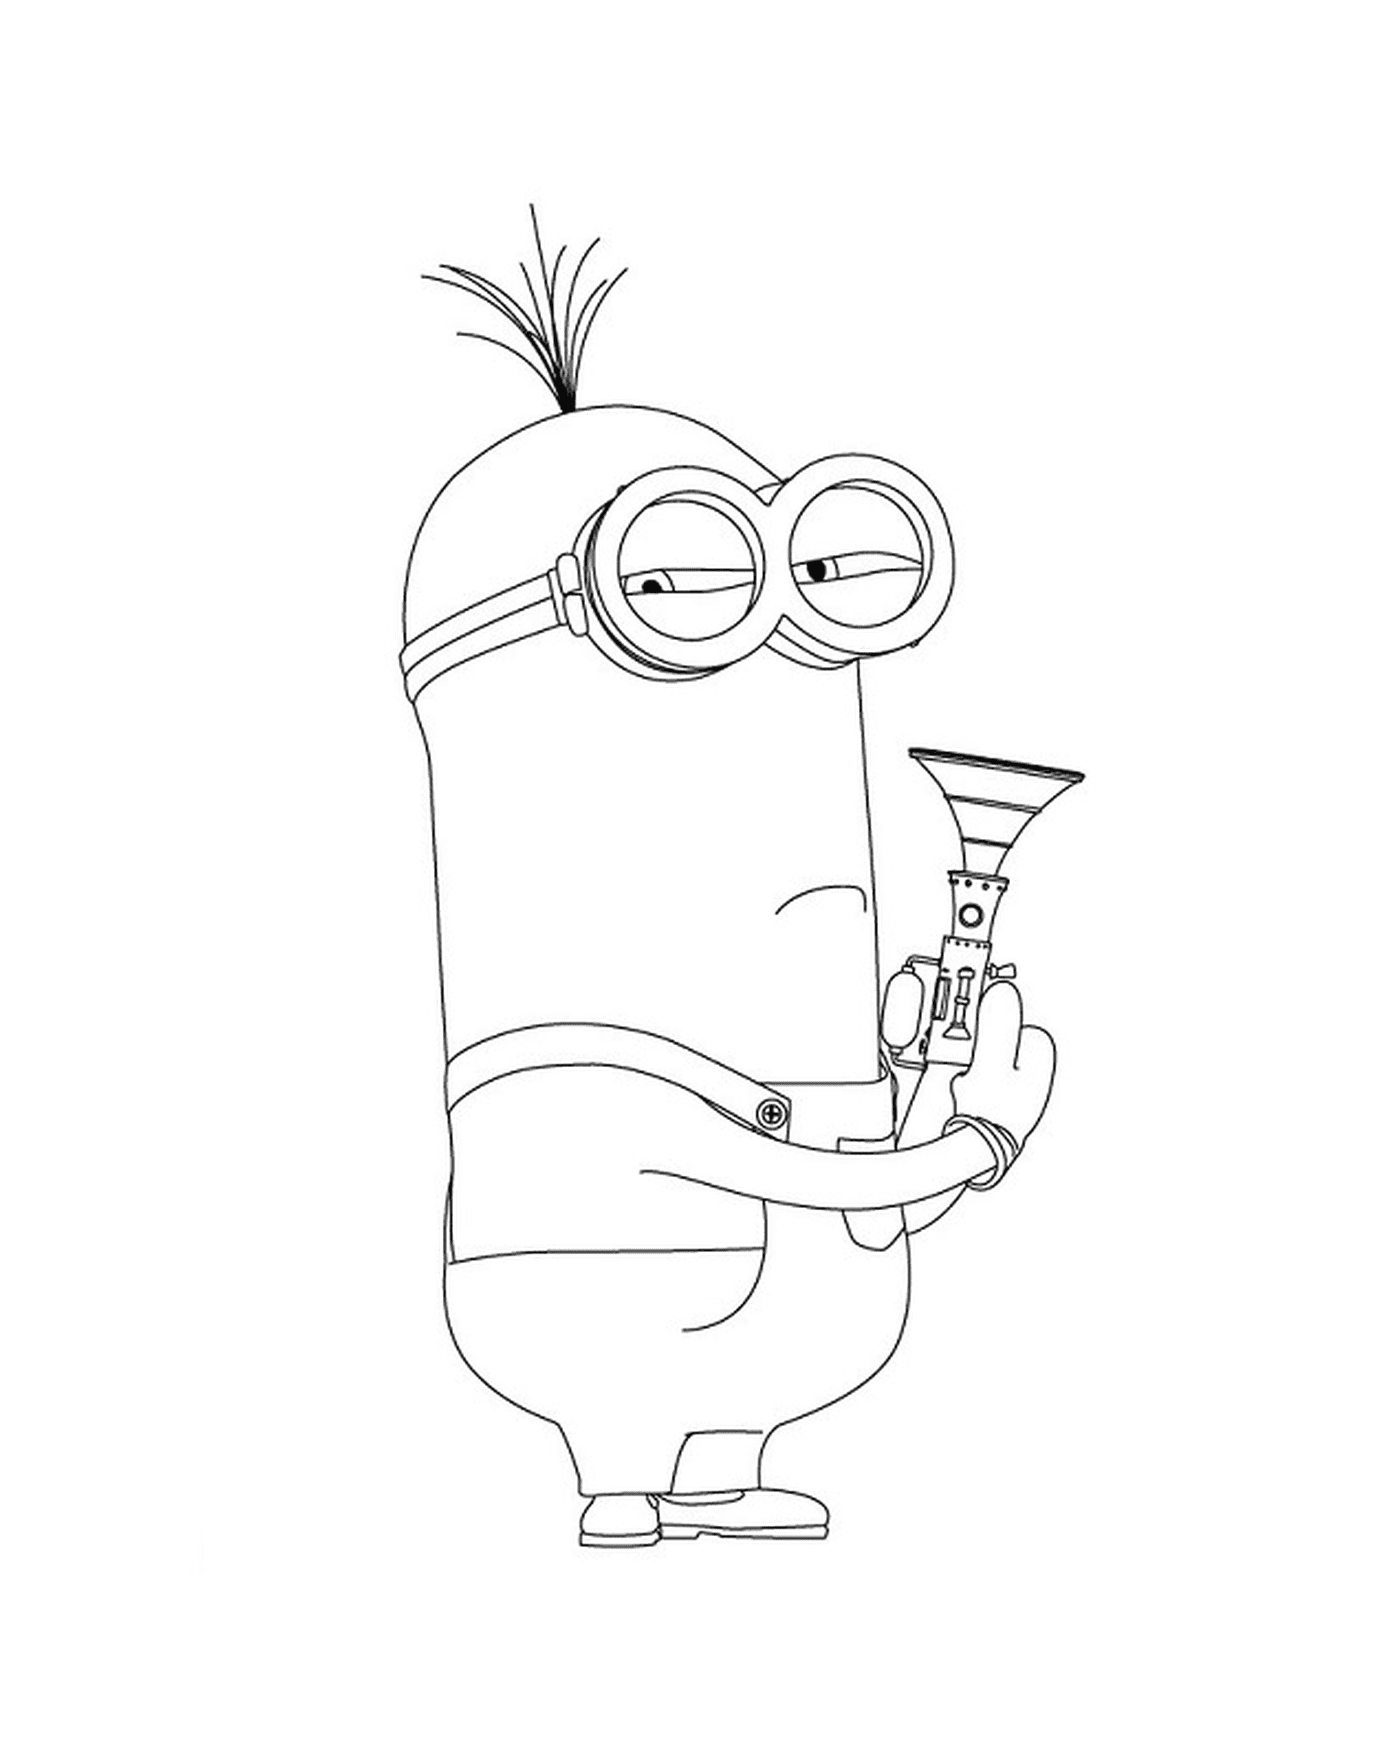  Mouse and Bad 21, Minion with a microphone 